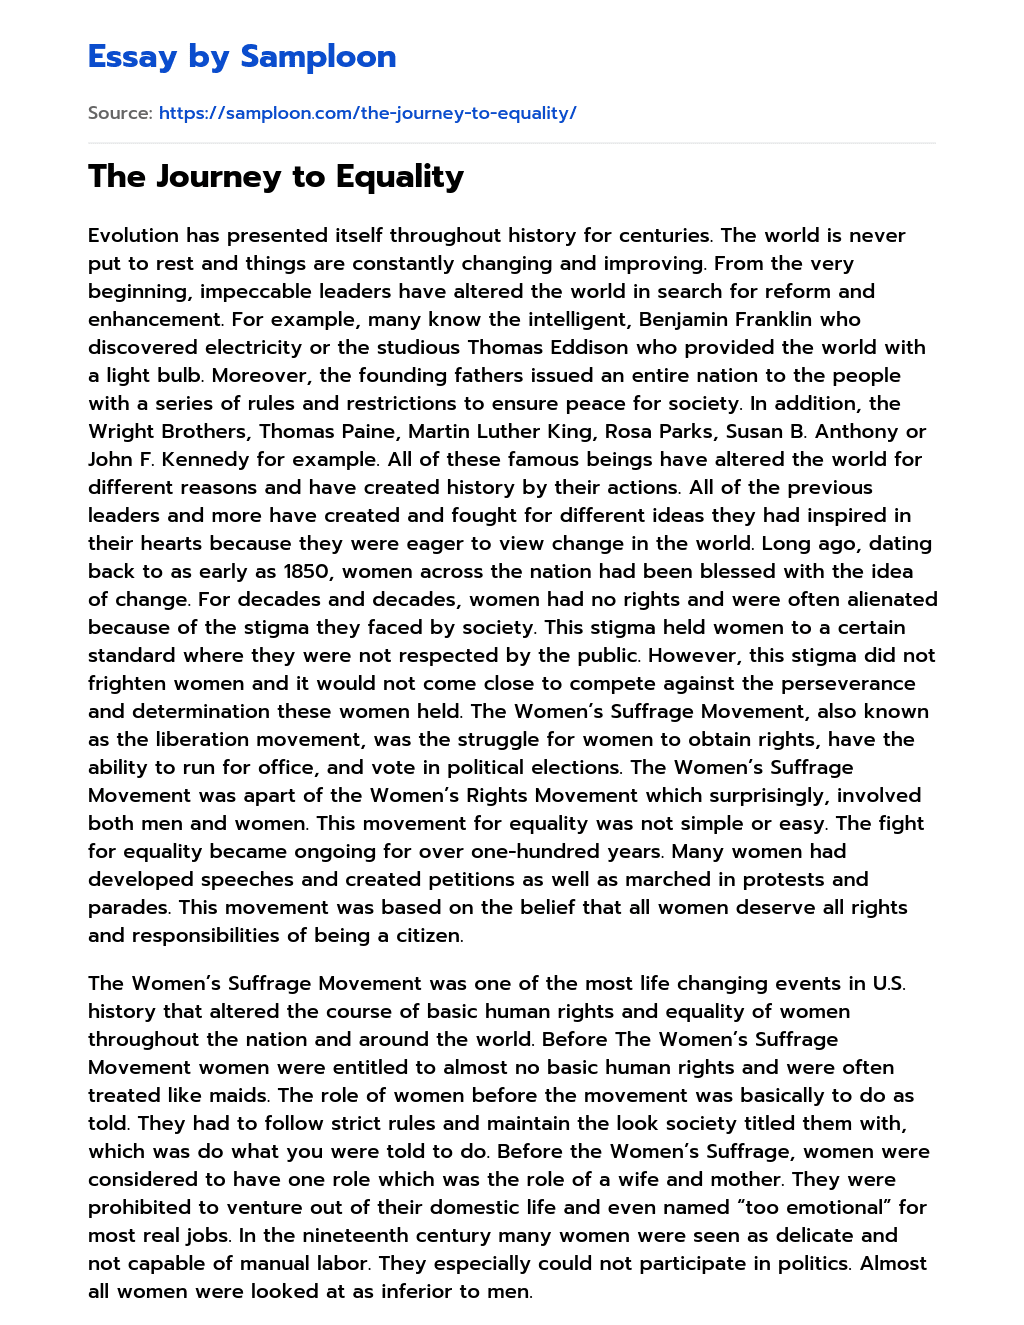 The Journey to Equality essay